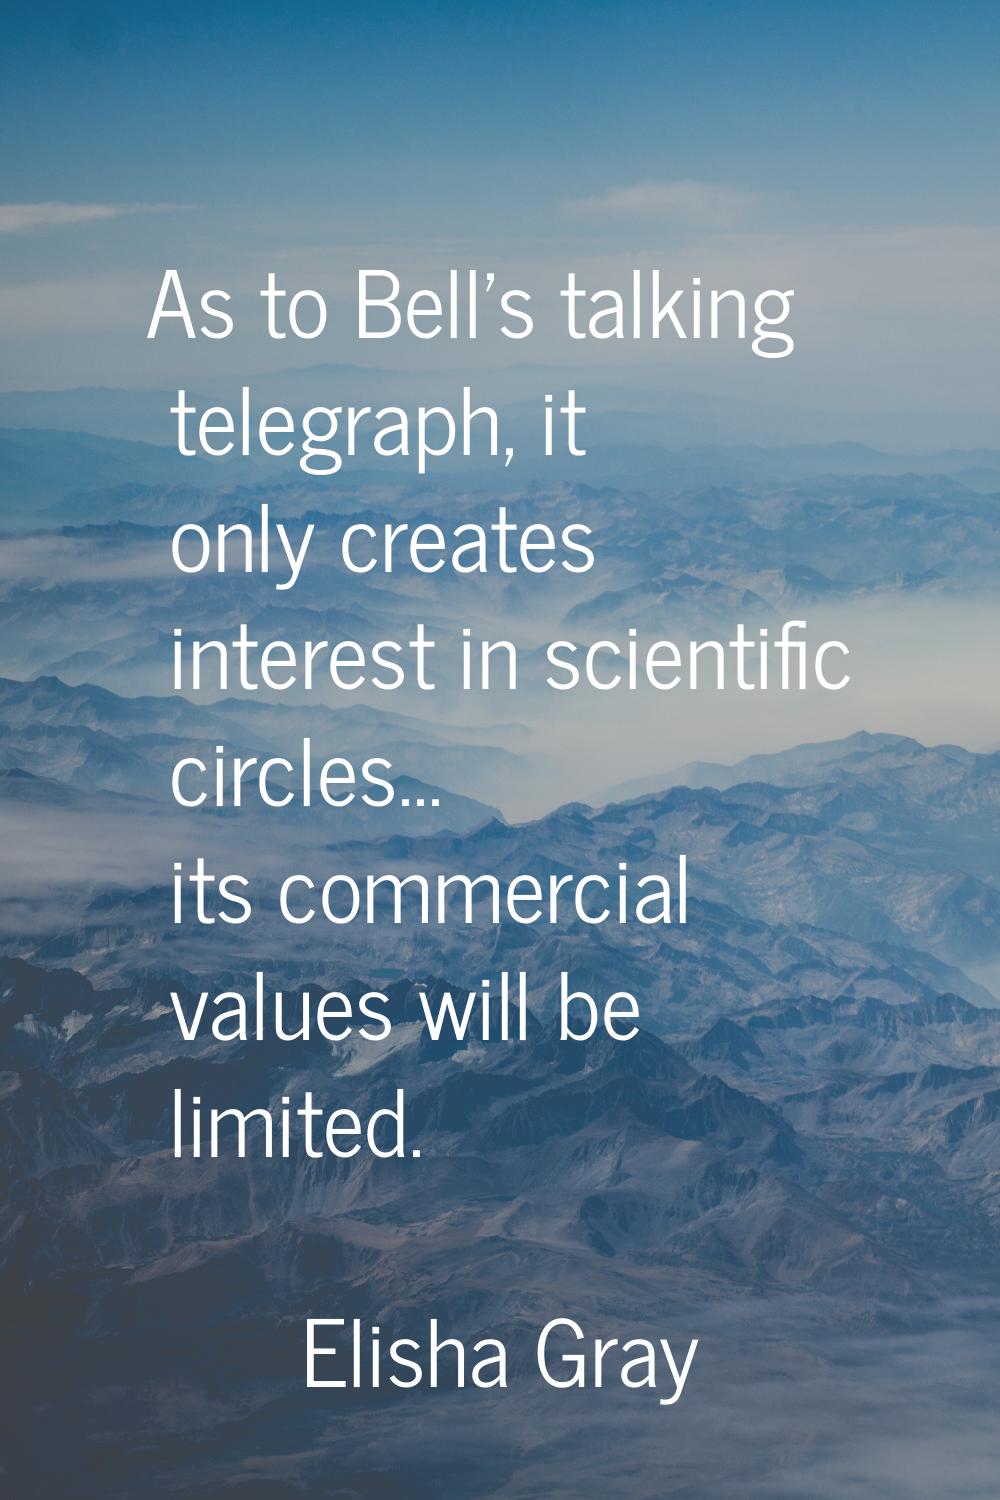 As to Bell's talking telegraph, it only creates interest in scientific circles... its commercial va